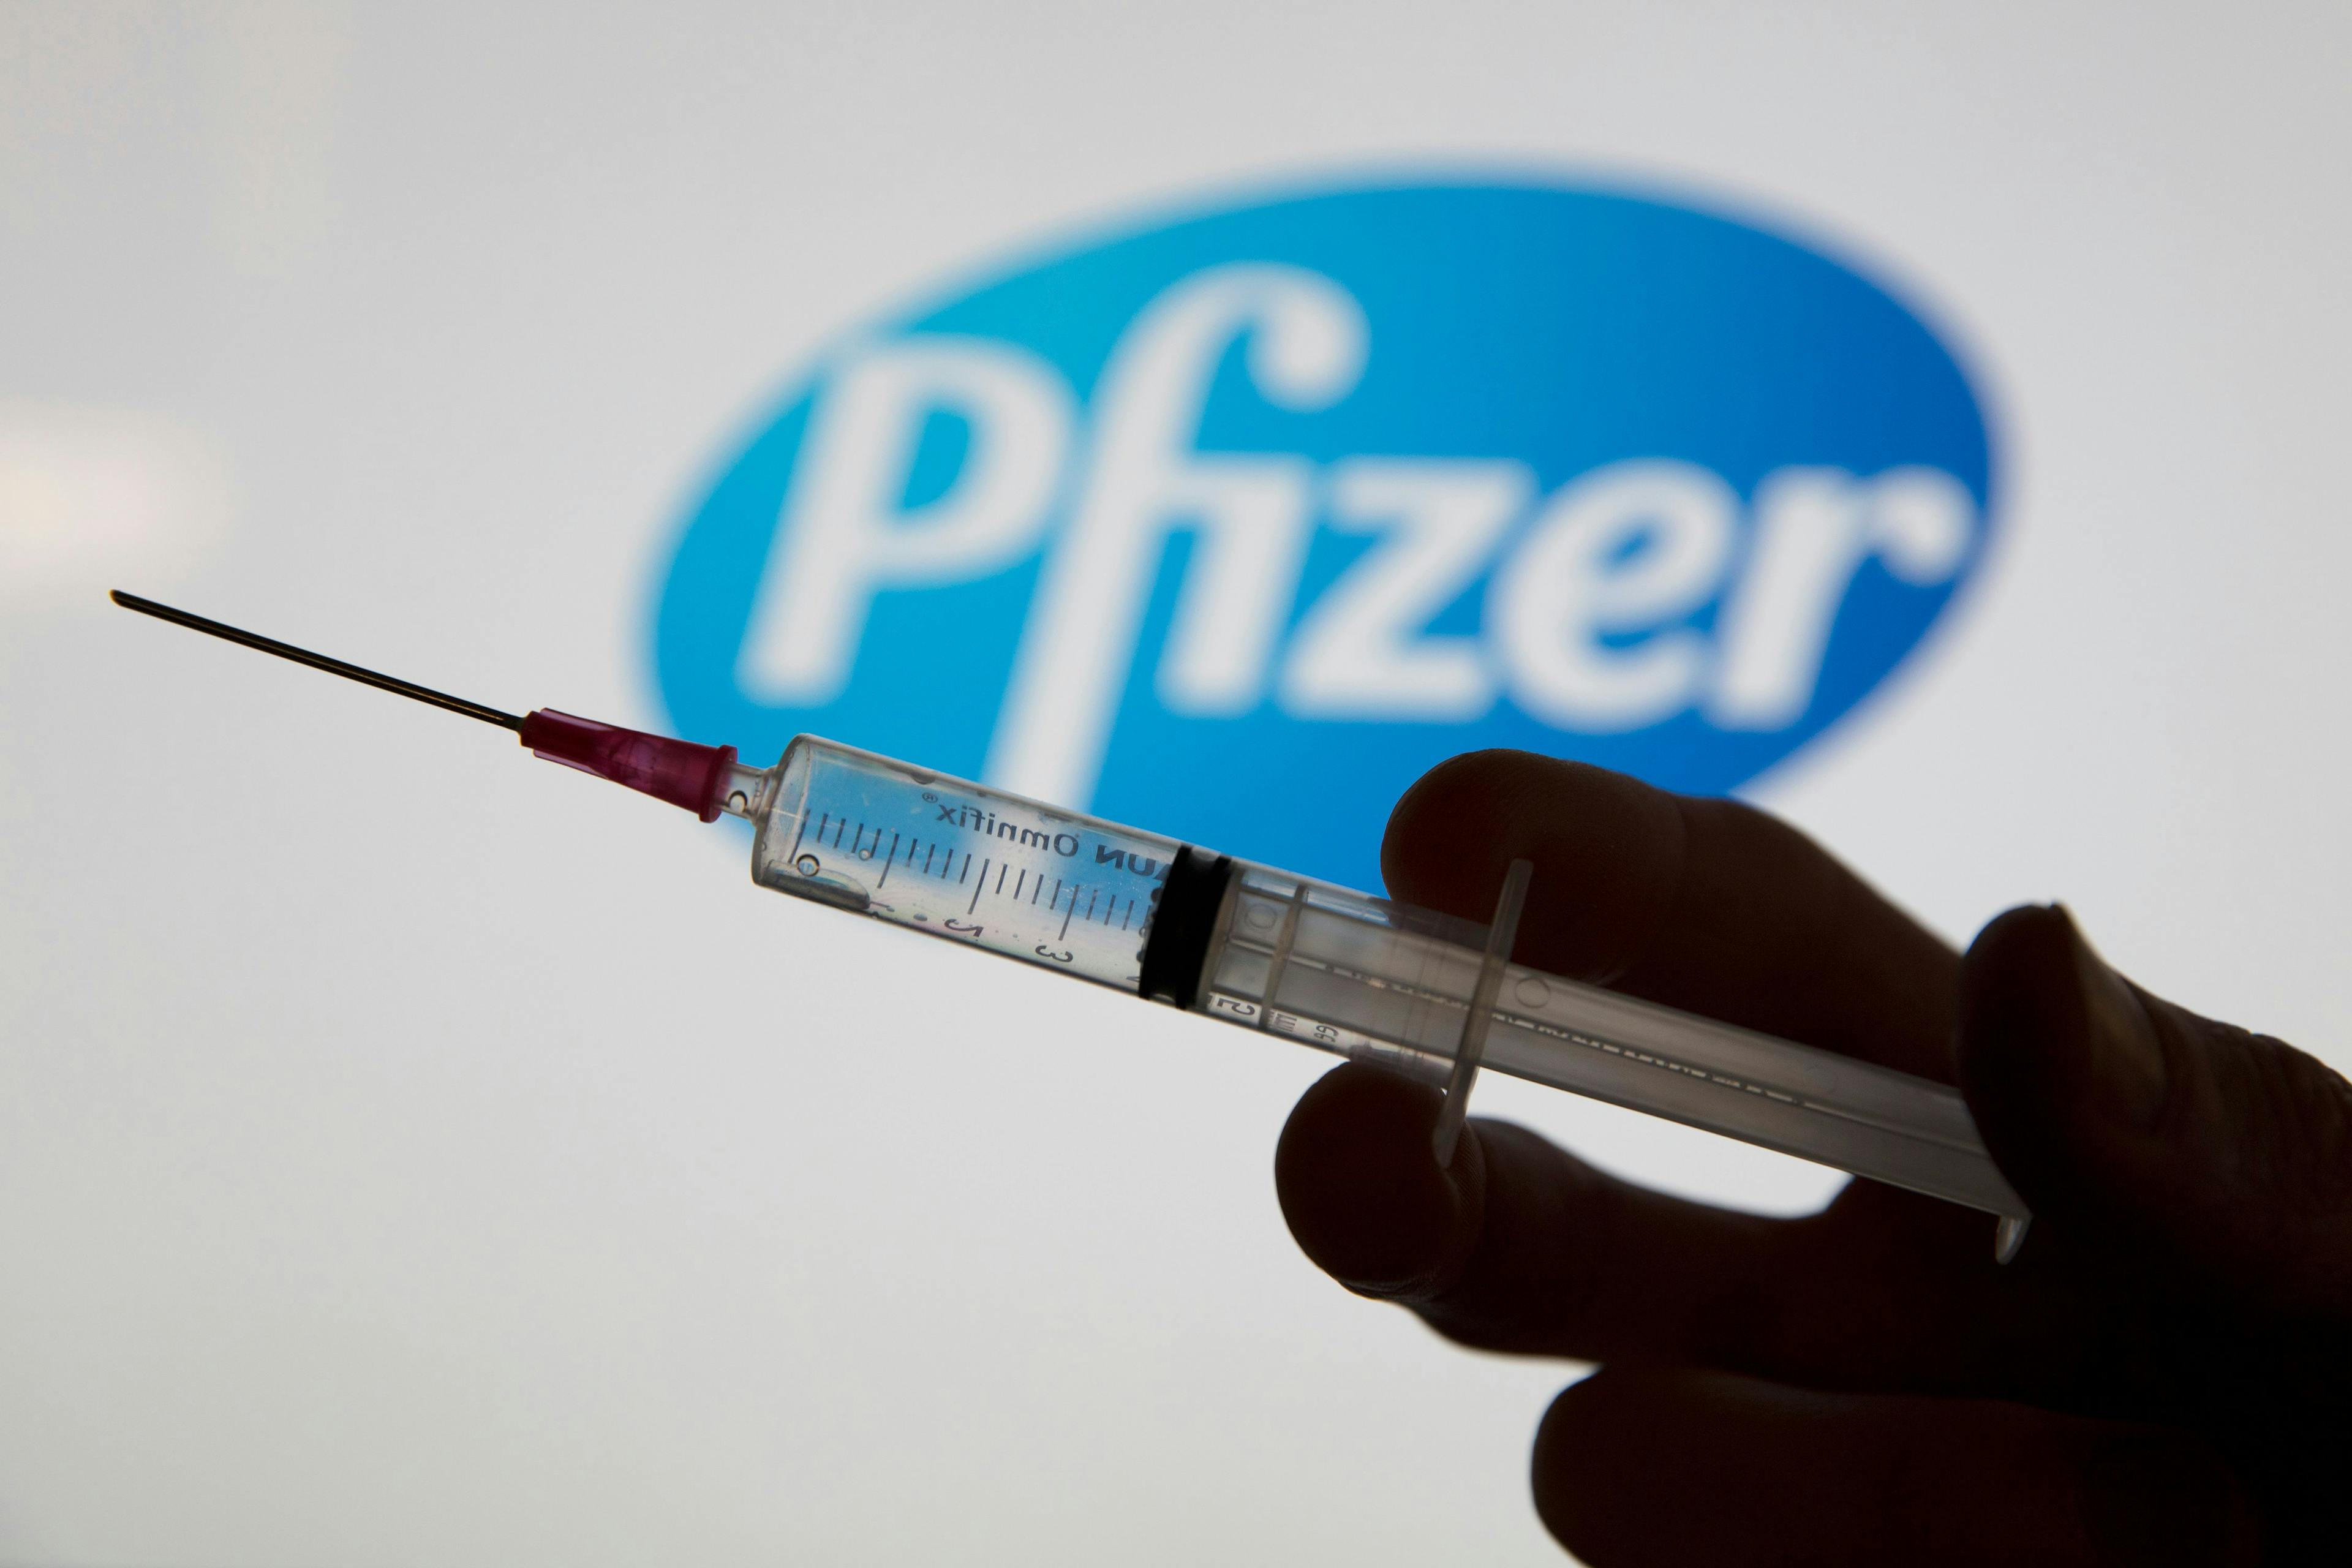 Pfizer indicates their RSV vaccine candidate, Abrysvo (RSVpreF), to prevent acute respiratory disease and lower respiratory tract disease caused by respiratory syncytial virus (RSV) in adults 60 years and older by active immunization.